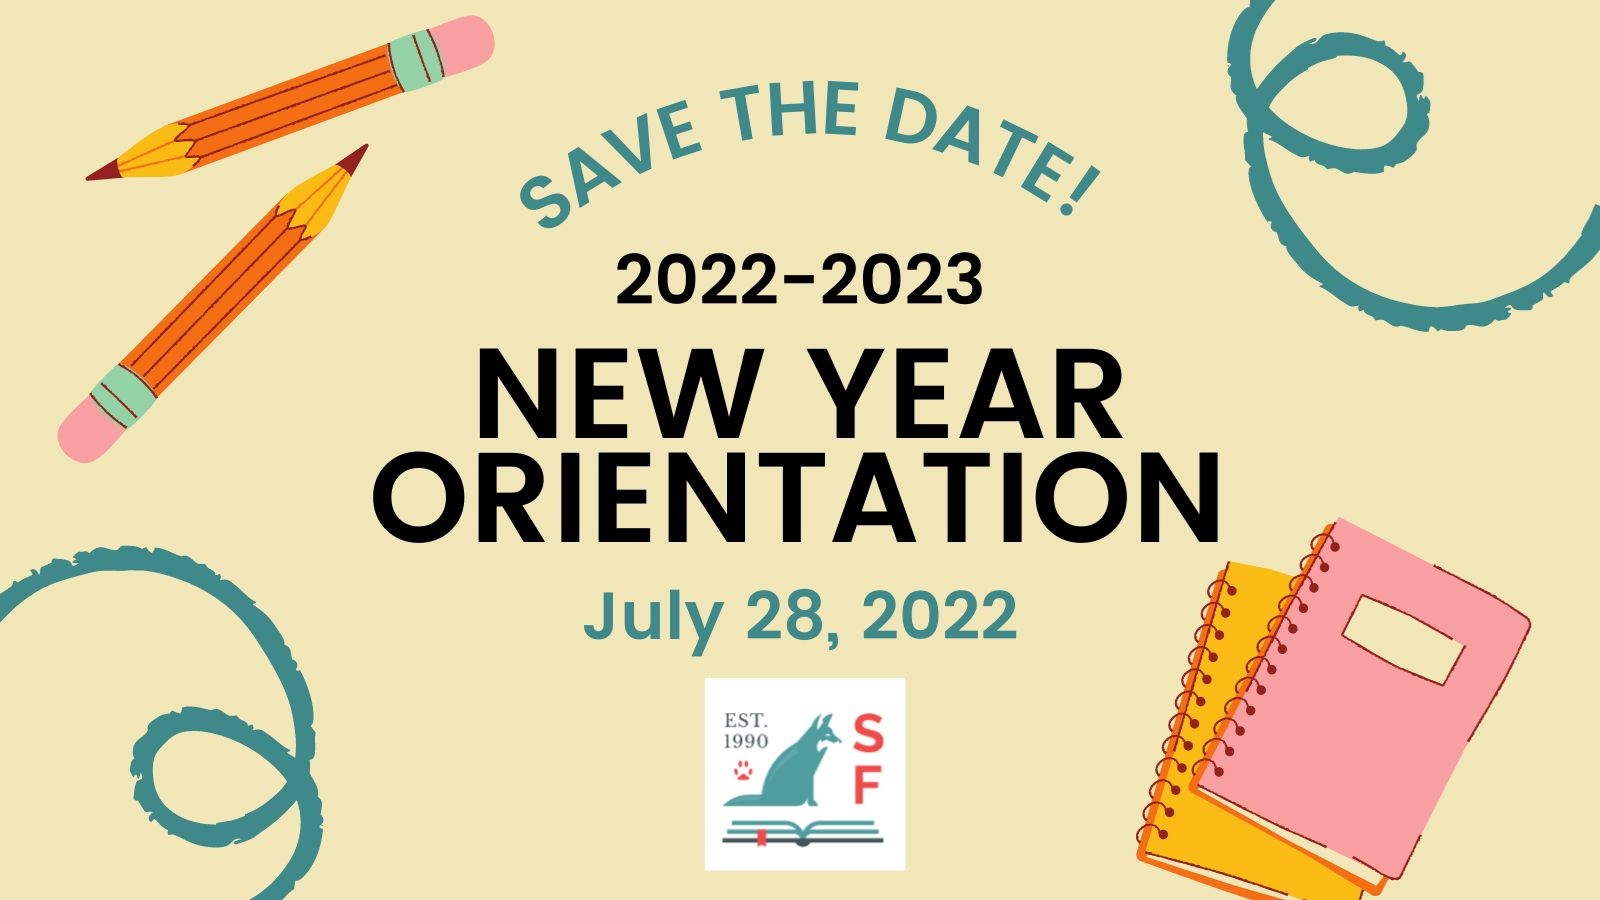 Save the Date! New Year Orientation